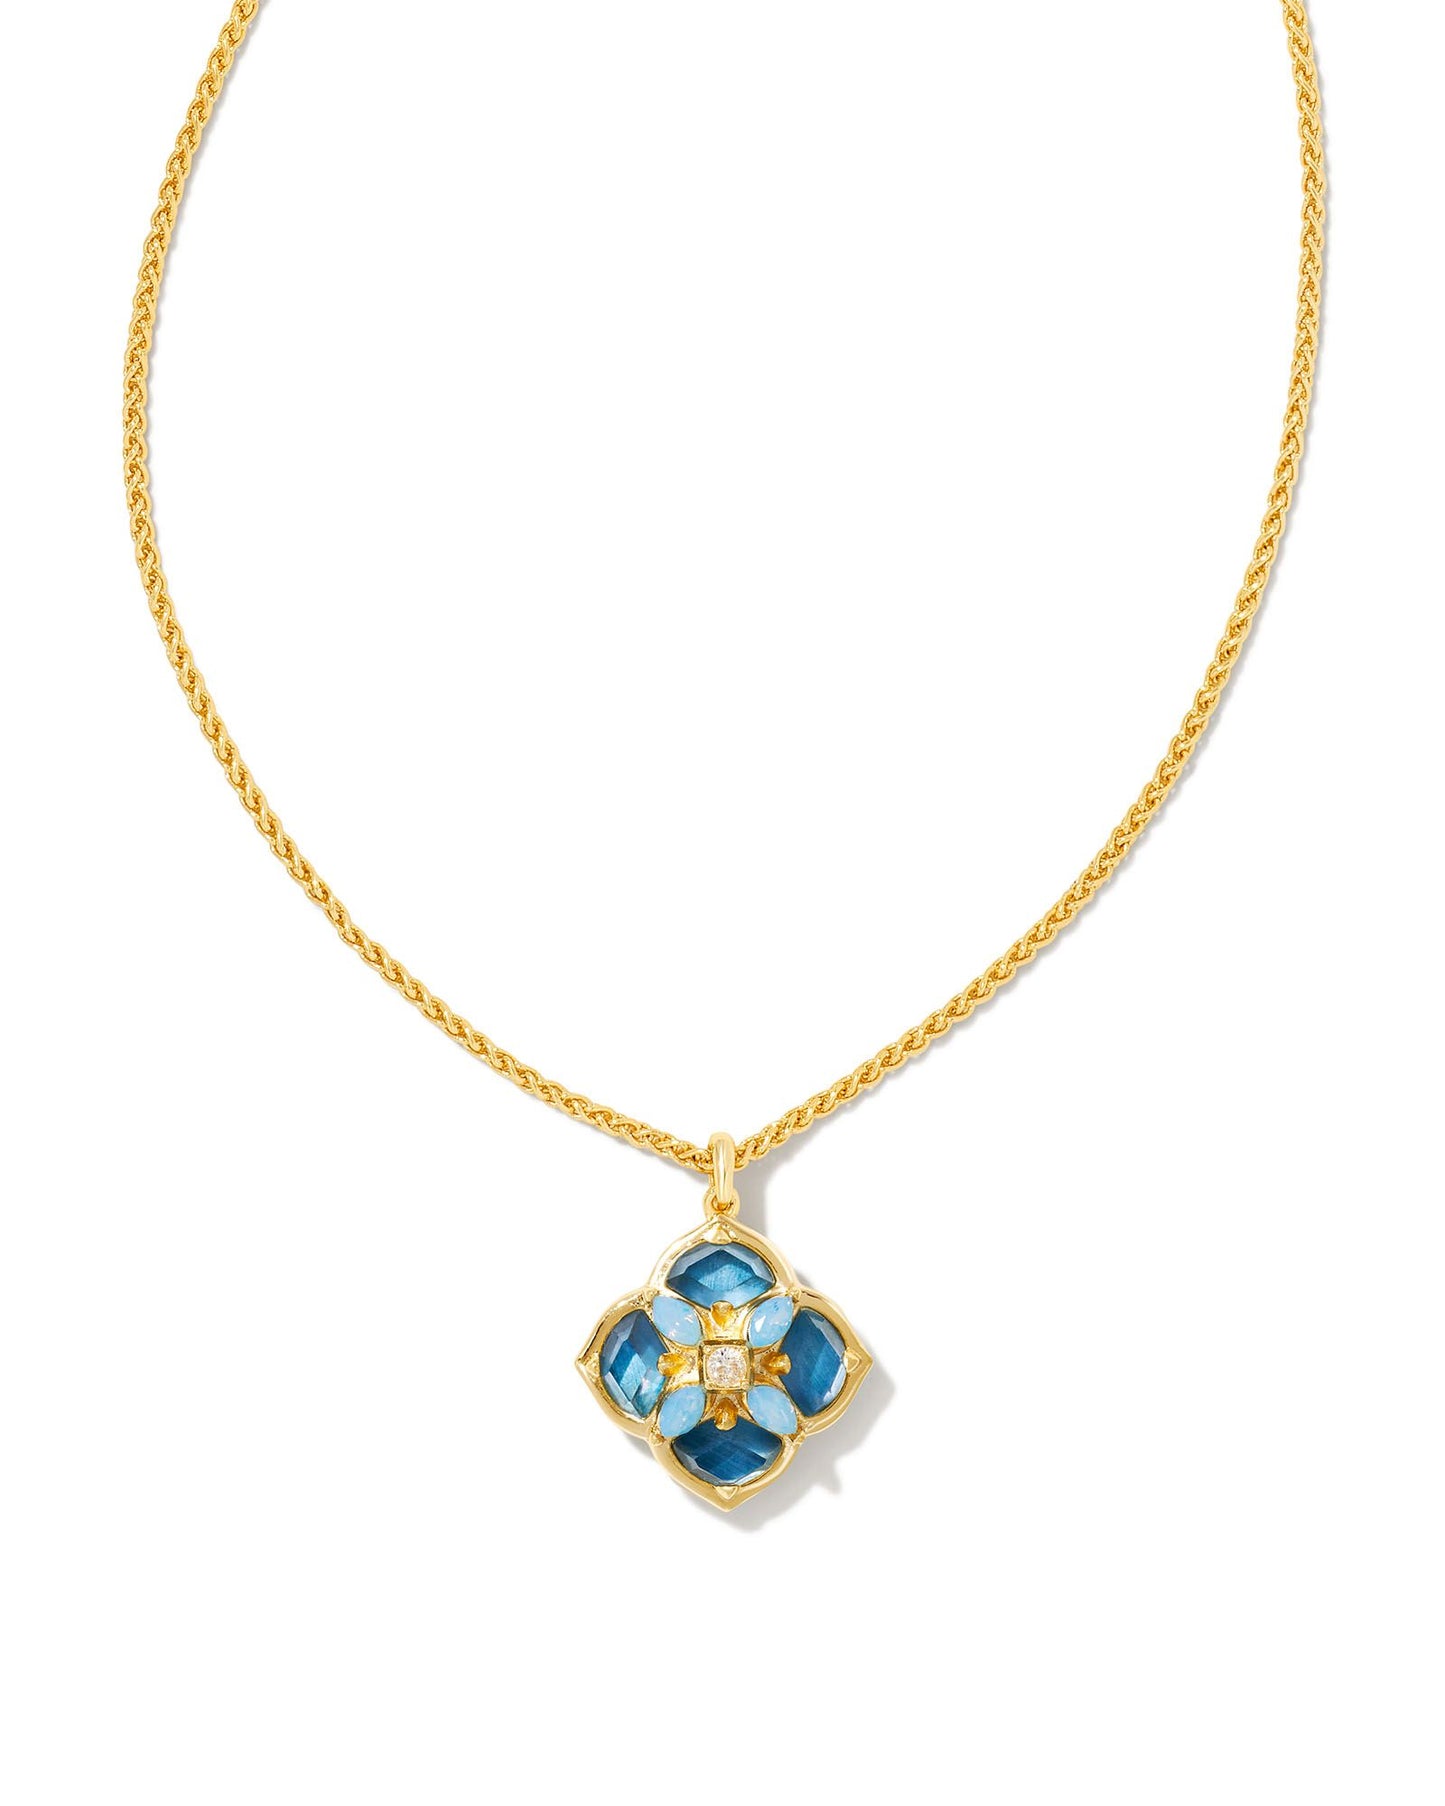 Our signature logo meets gorgeous stone detailing for the first time in the Dira Stone Gold Short Pendant Necklace. Featuring custom-cut stones and gems assembled into our logo shape, this pendant is bound to be a new favorite in your collection. The metal is 24k gold plated over brass with blue mix stones. 